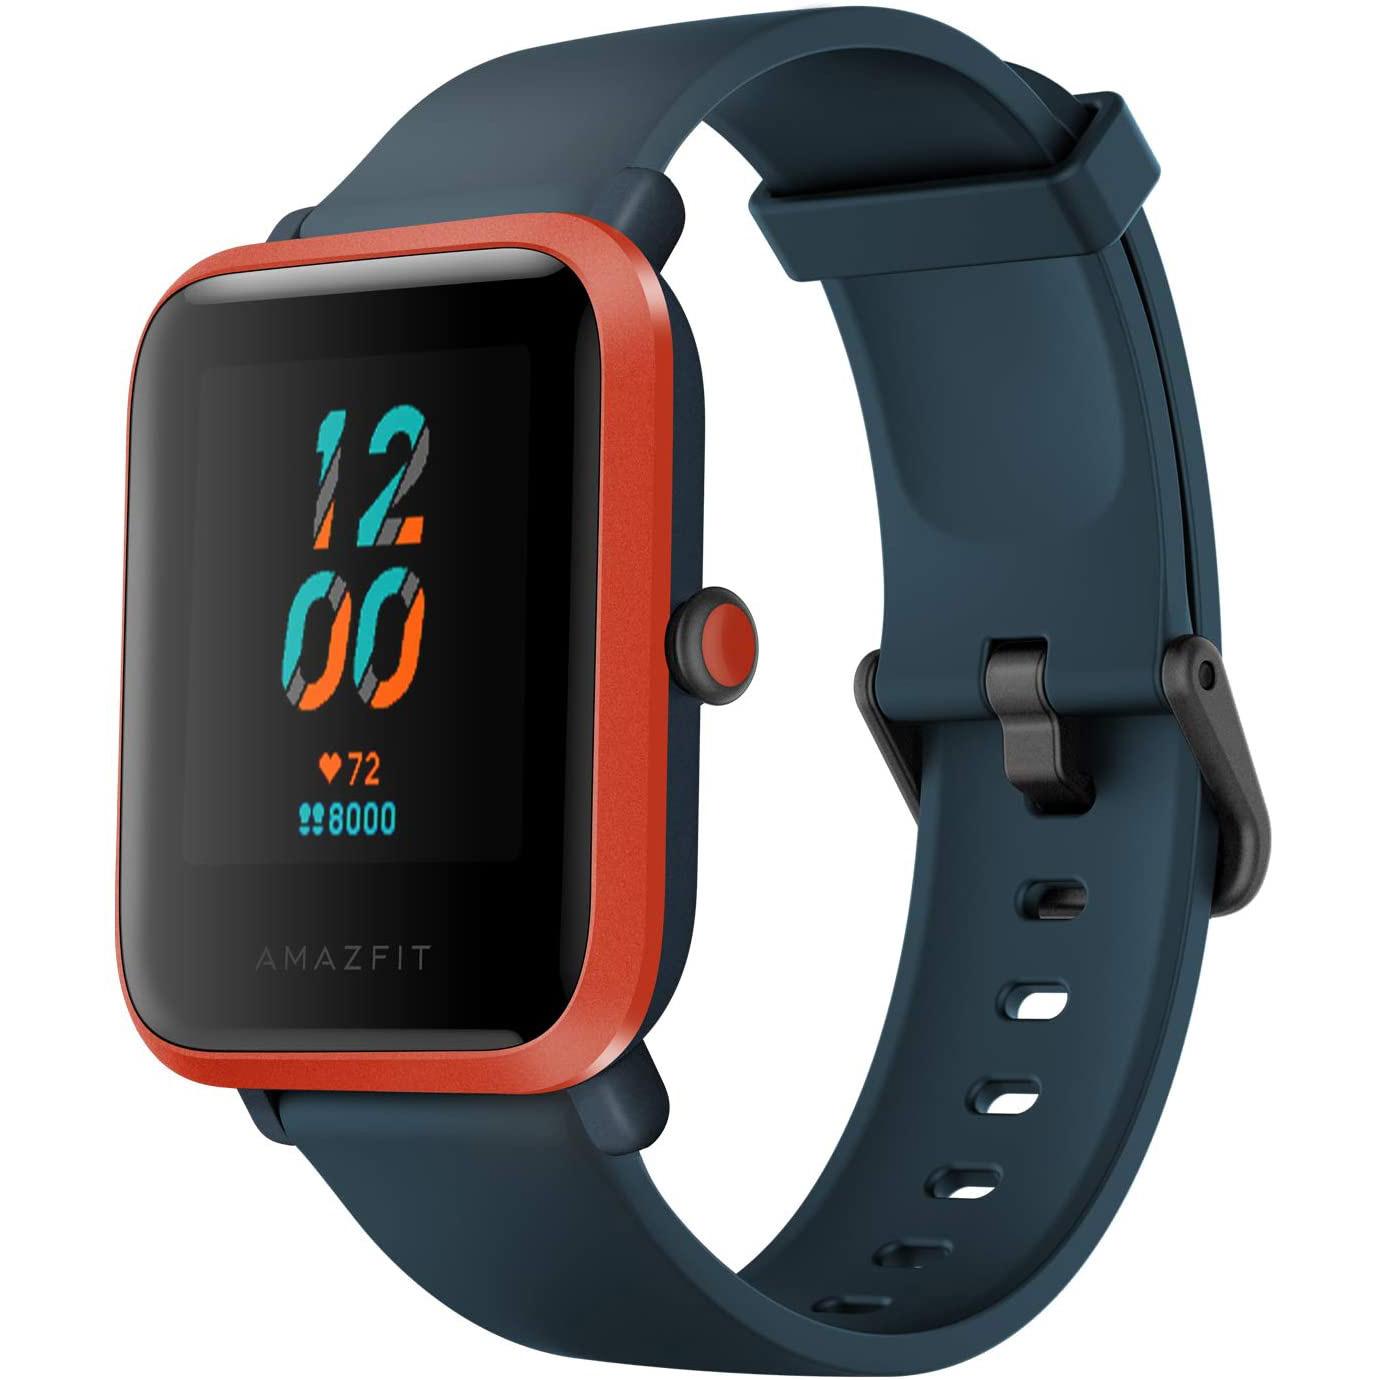 Amazfit Bip S Fitness GPS Smartwatch for $59.99 Shipped